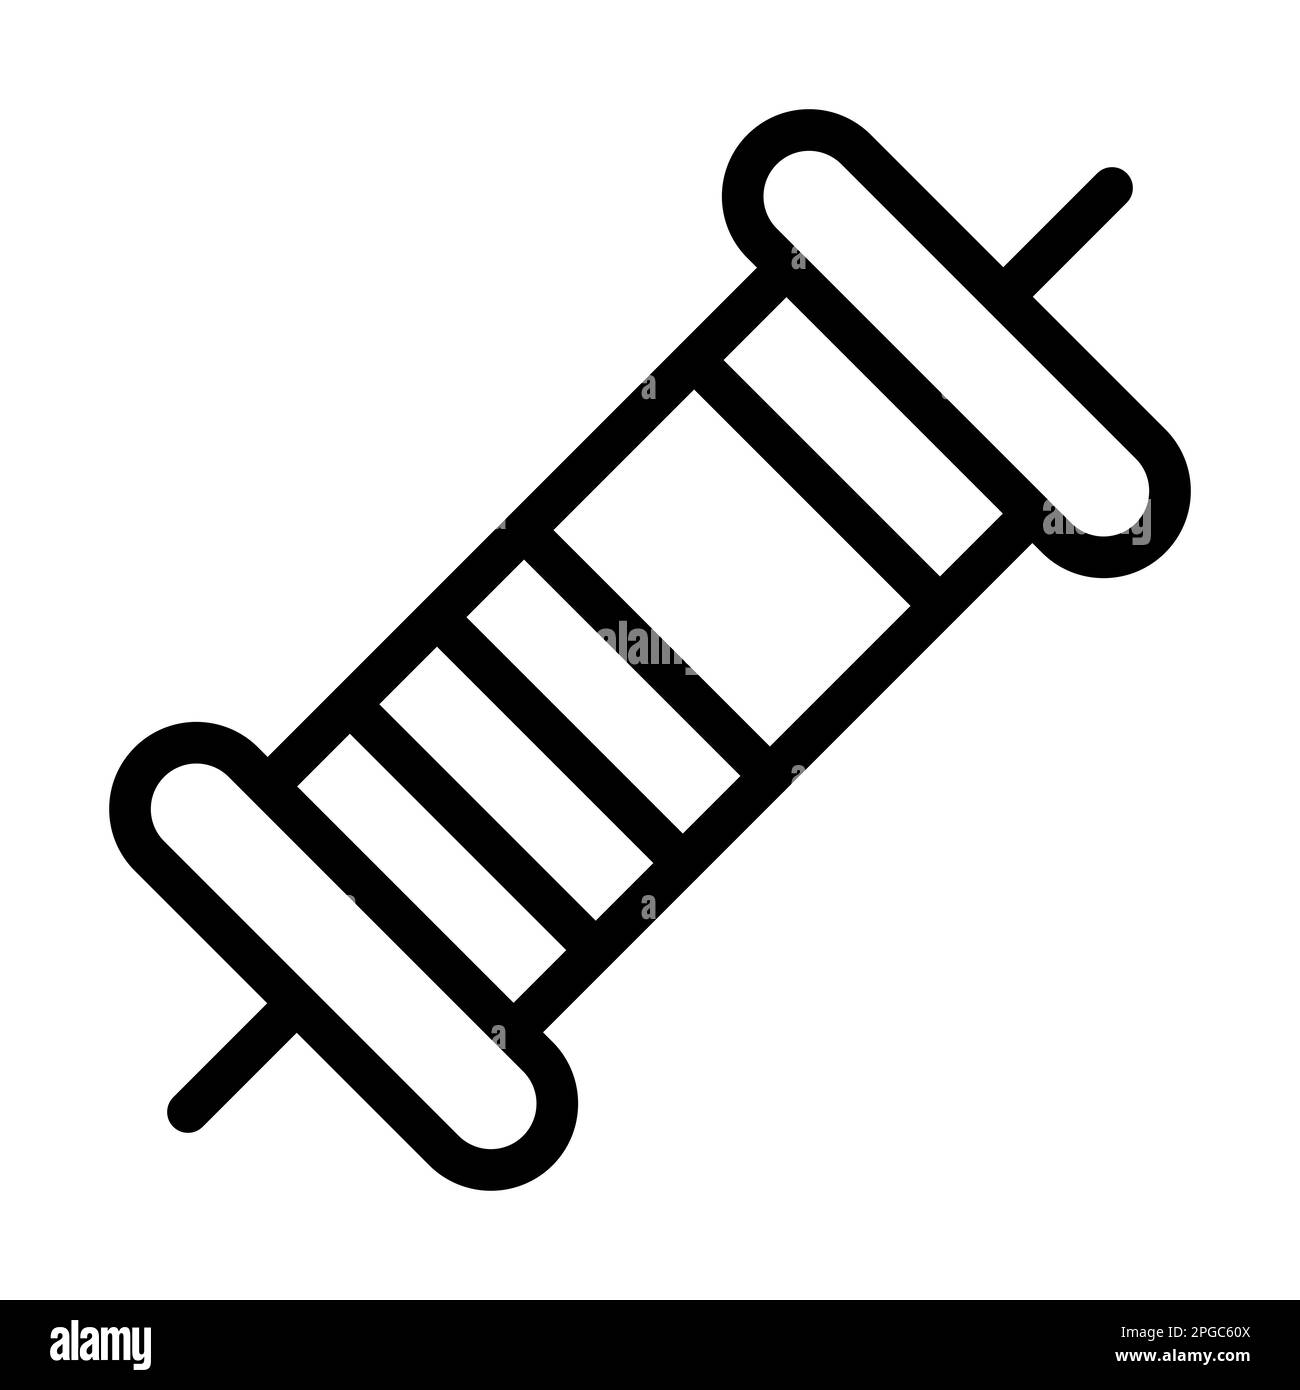 Resistor Vector Thick Line Icon For Personal And Commercial Use. Stock Photo